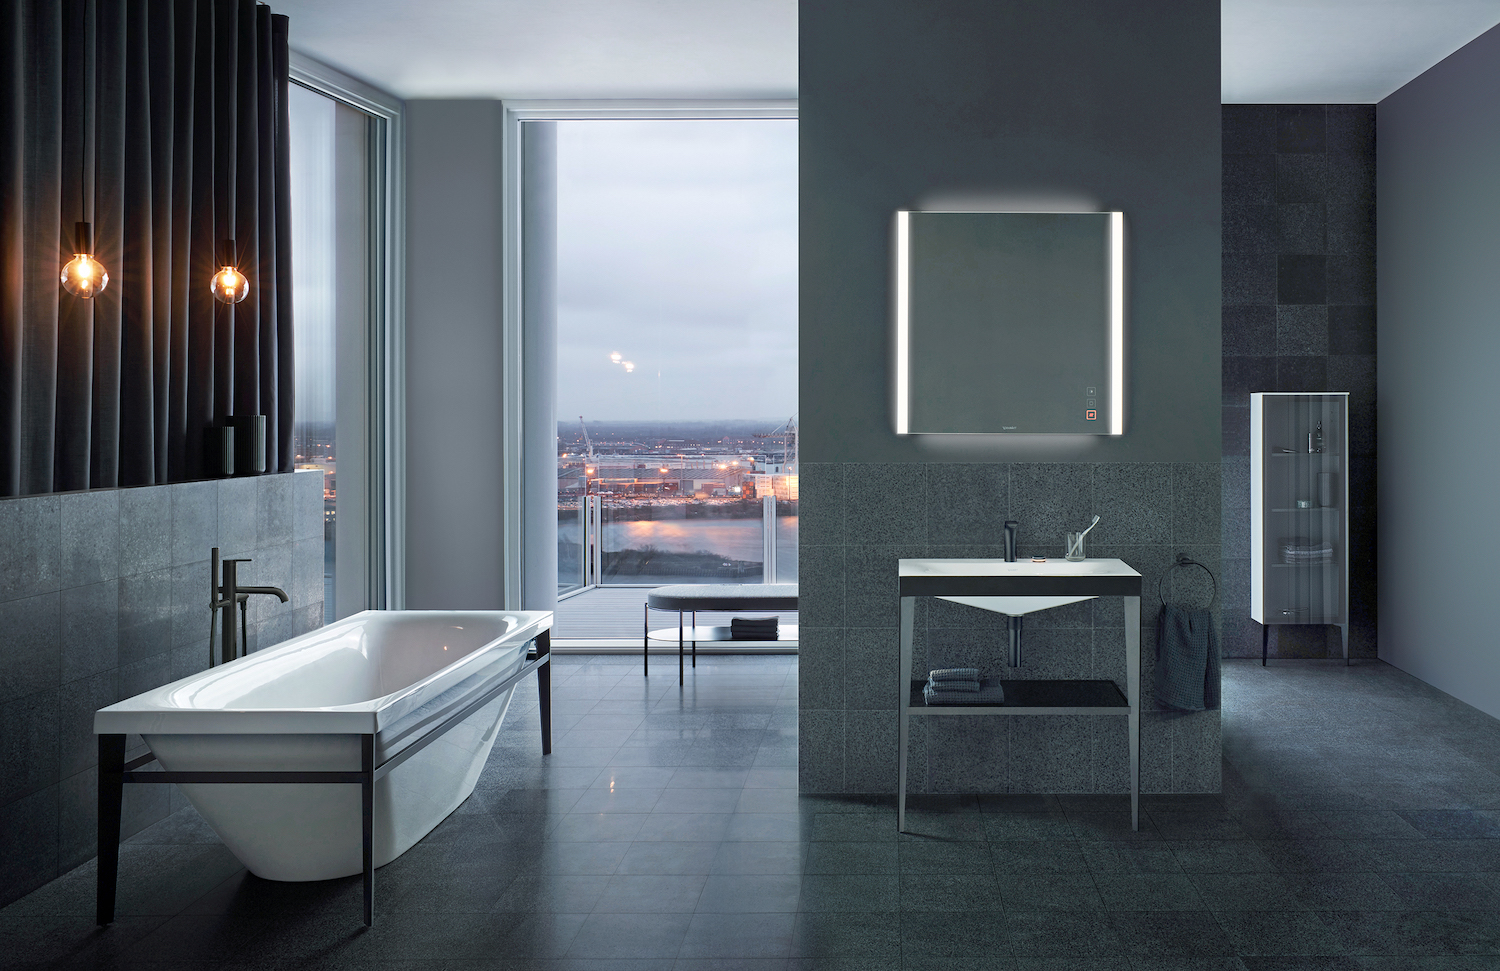 Connected technologies bring luxurious features to the bathroom.